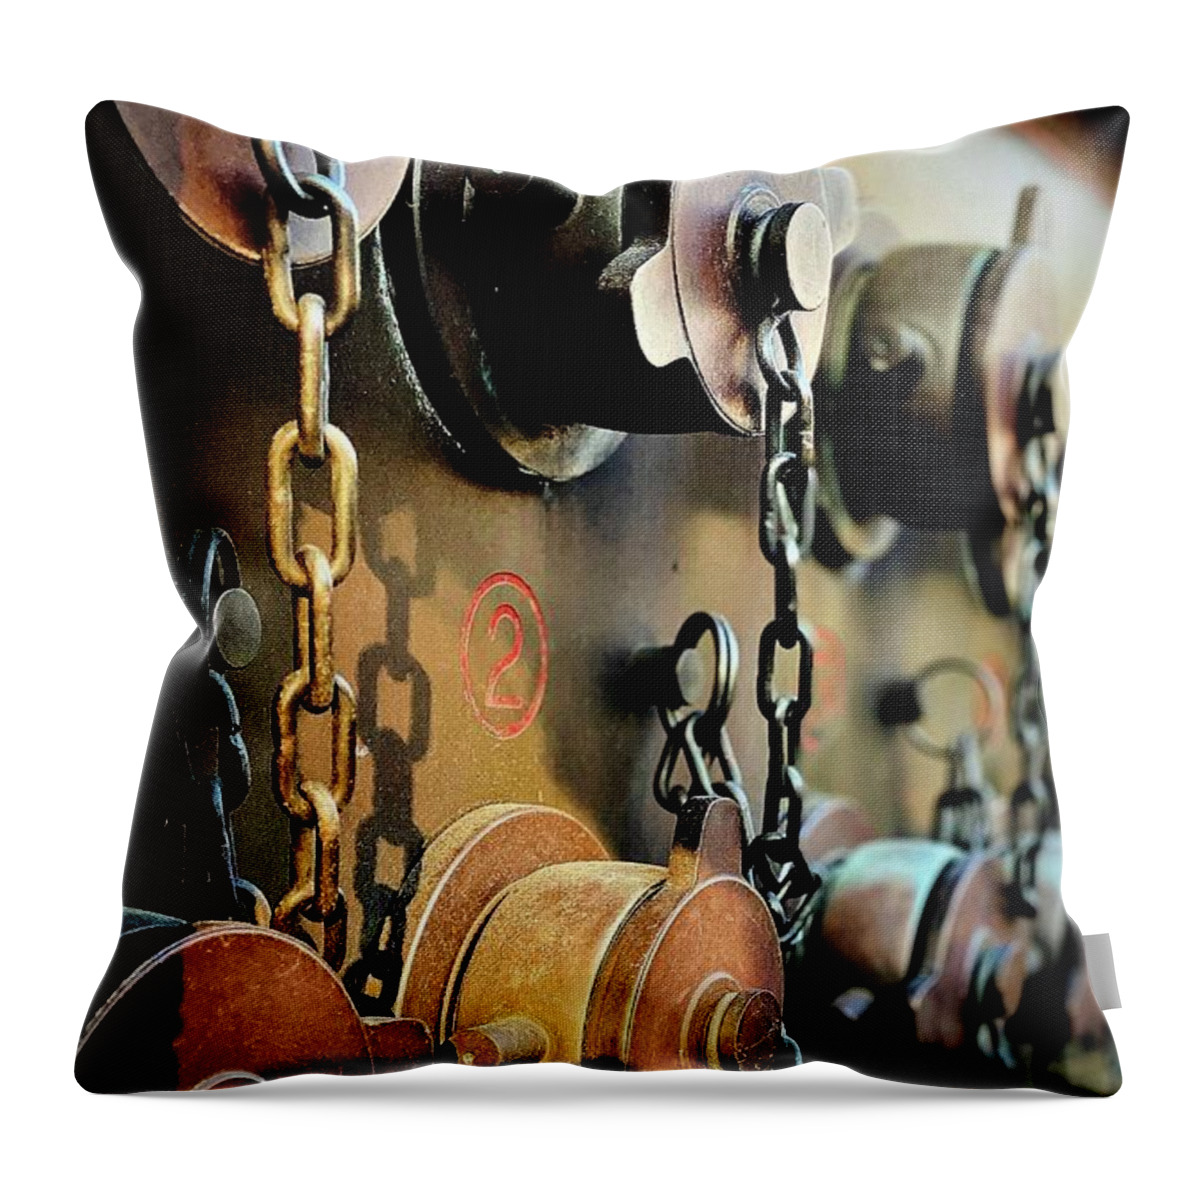 Rust Throw Pillow featuring the photograph Street Jewels #1 by Eena Bo